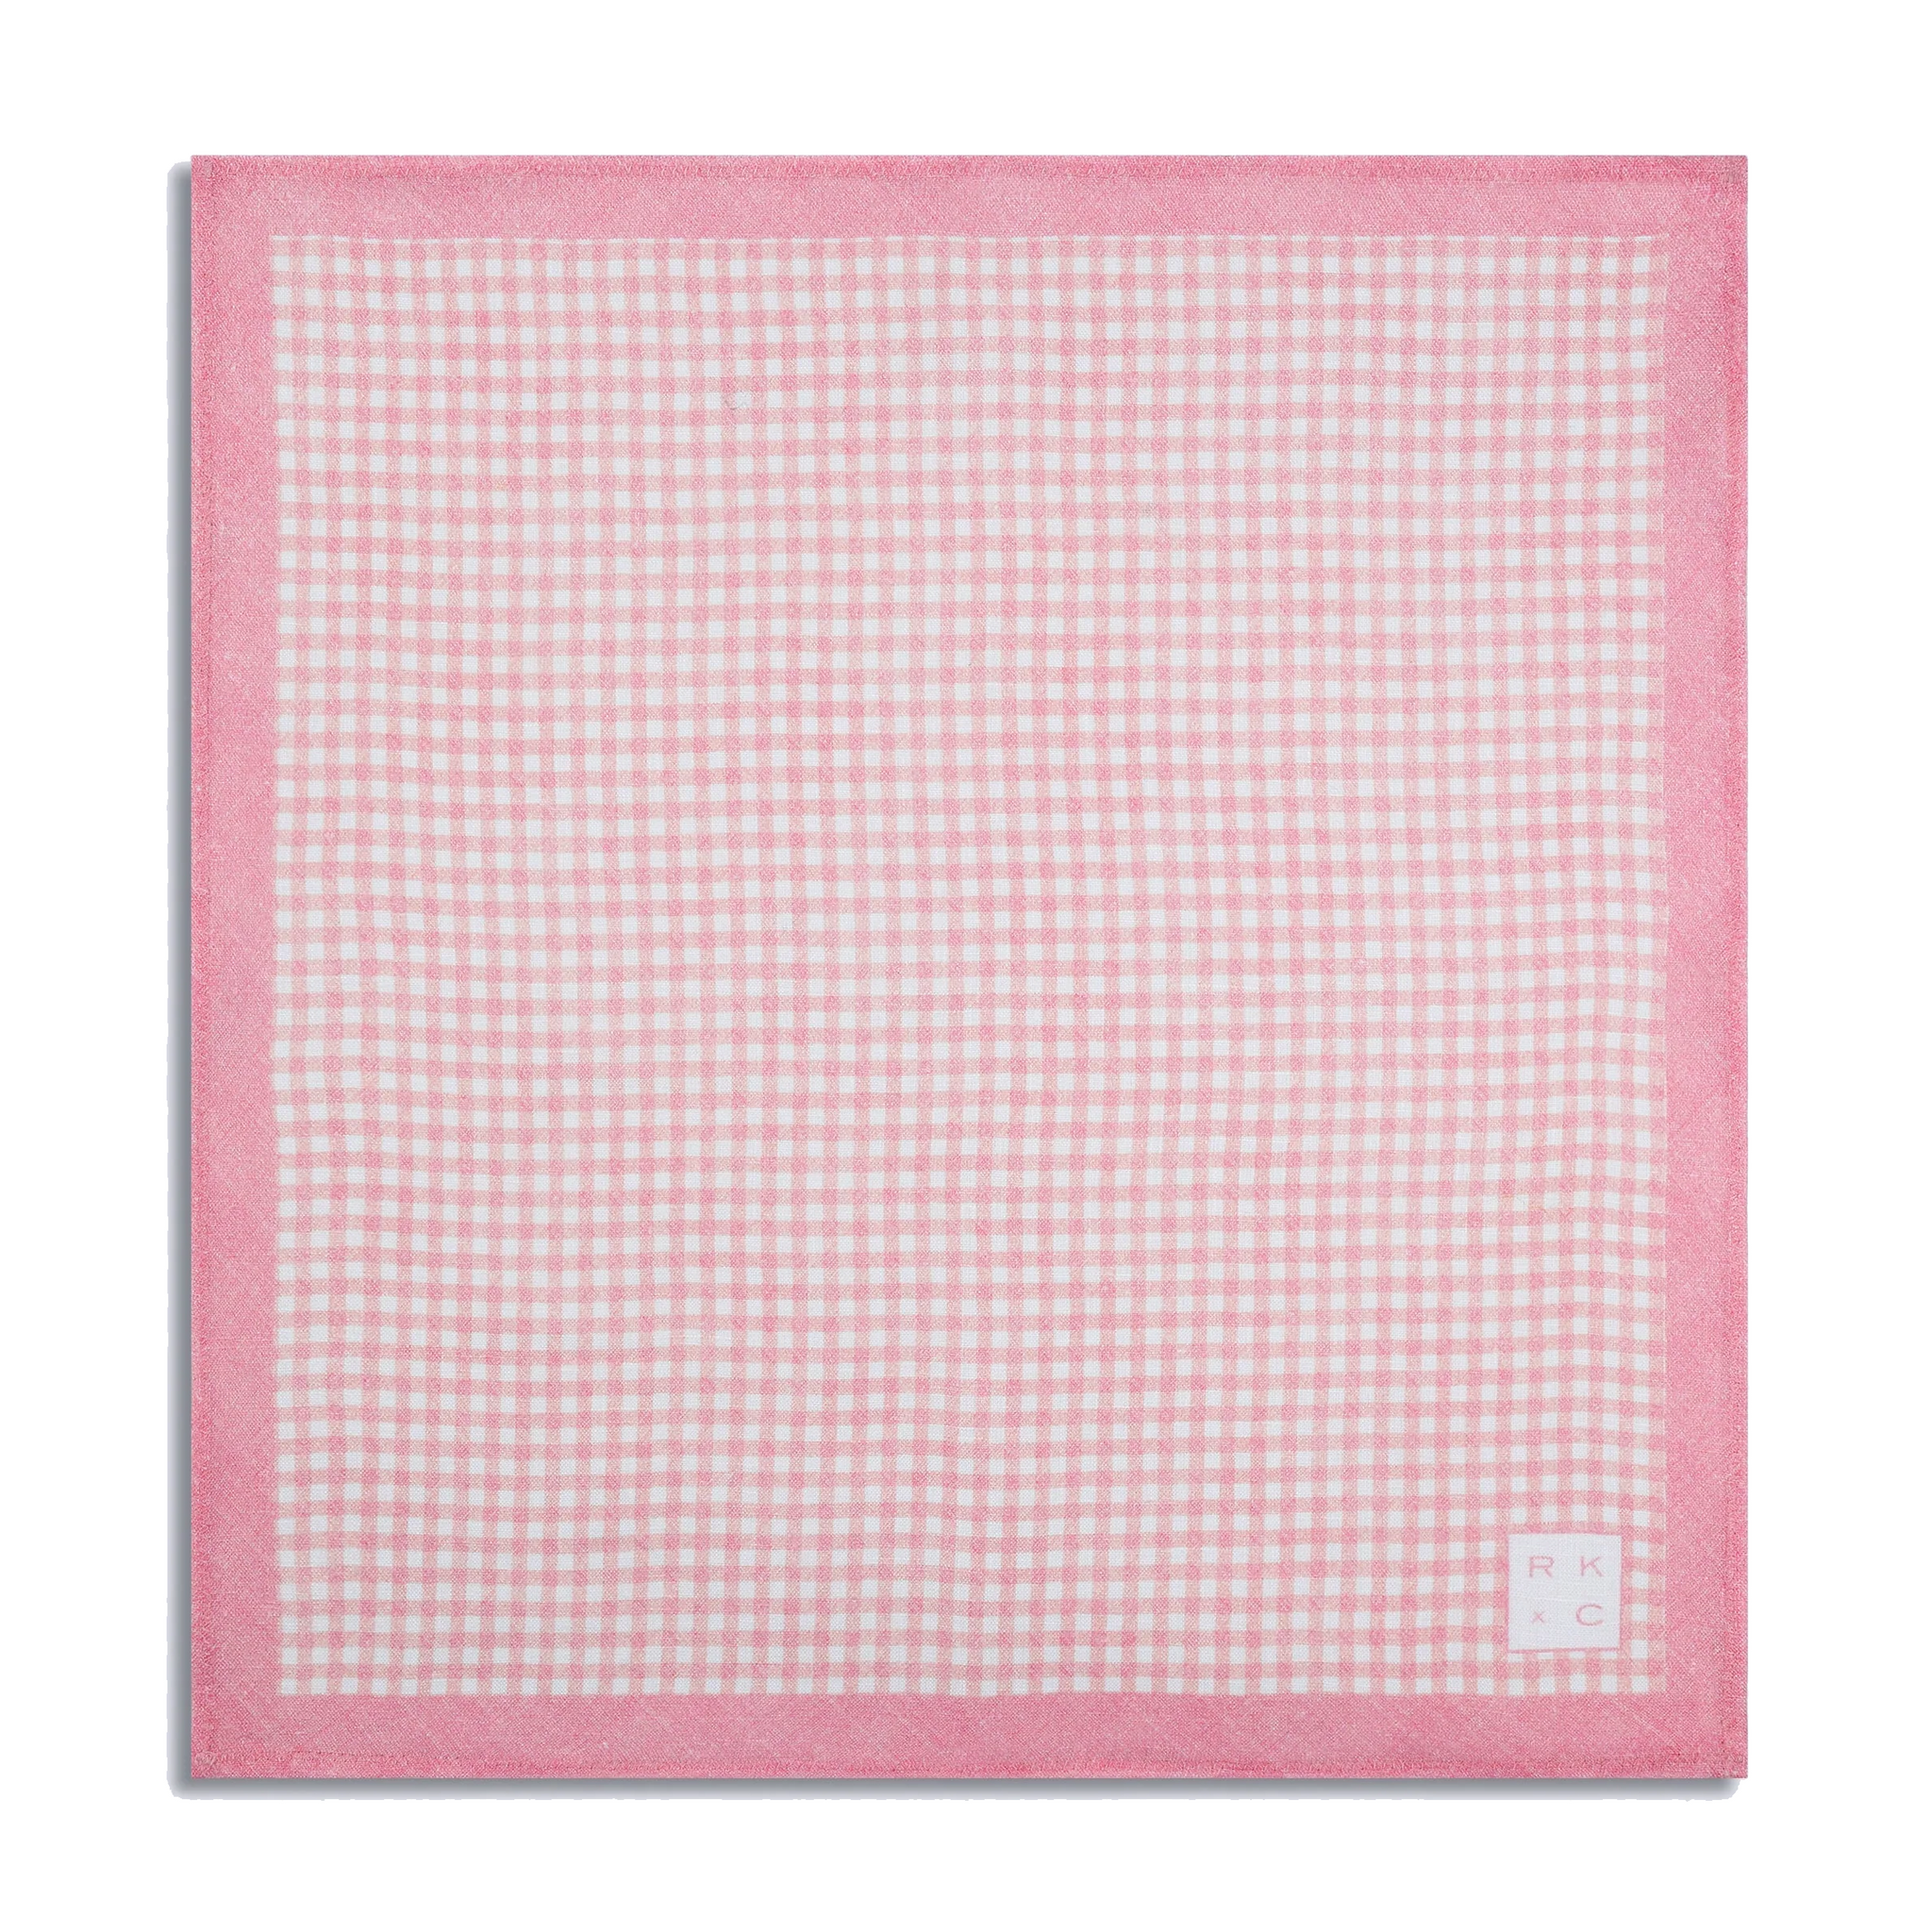 Checkered Past (Pink) - Pocket Square